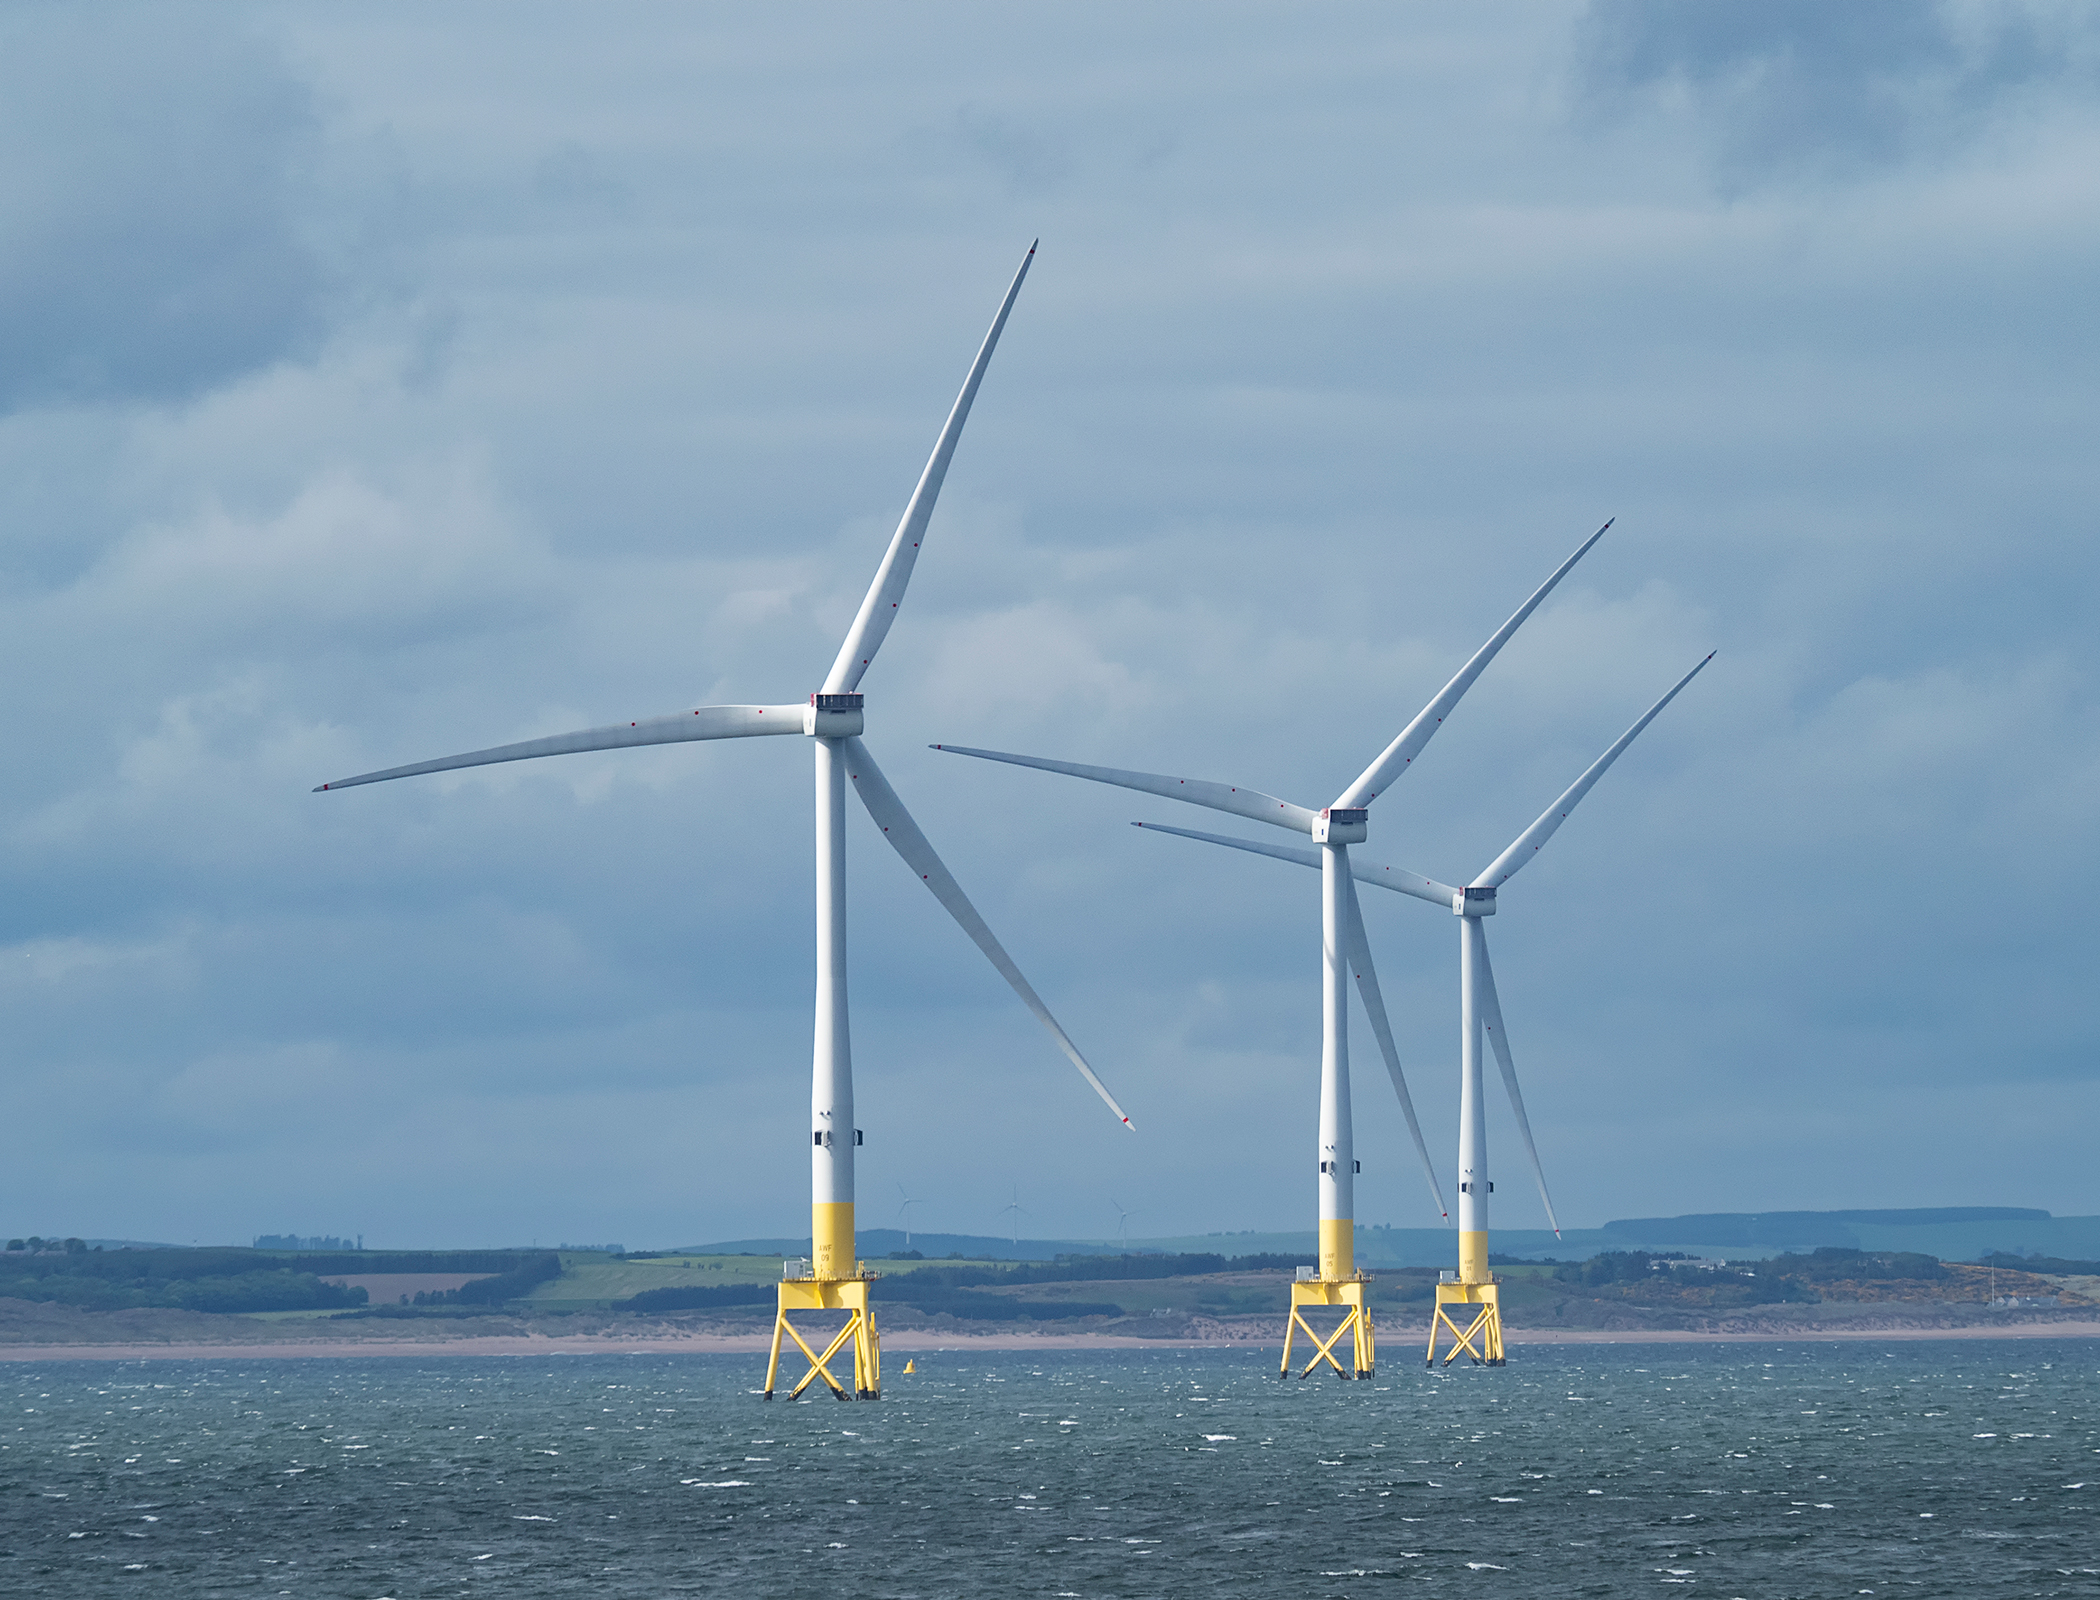 Treasury wind farm rules could cost UK billpayers £1.5bn a year